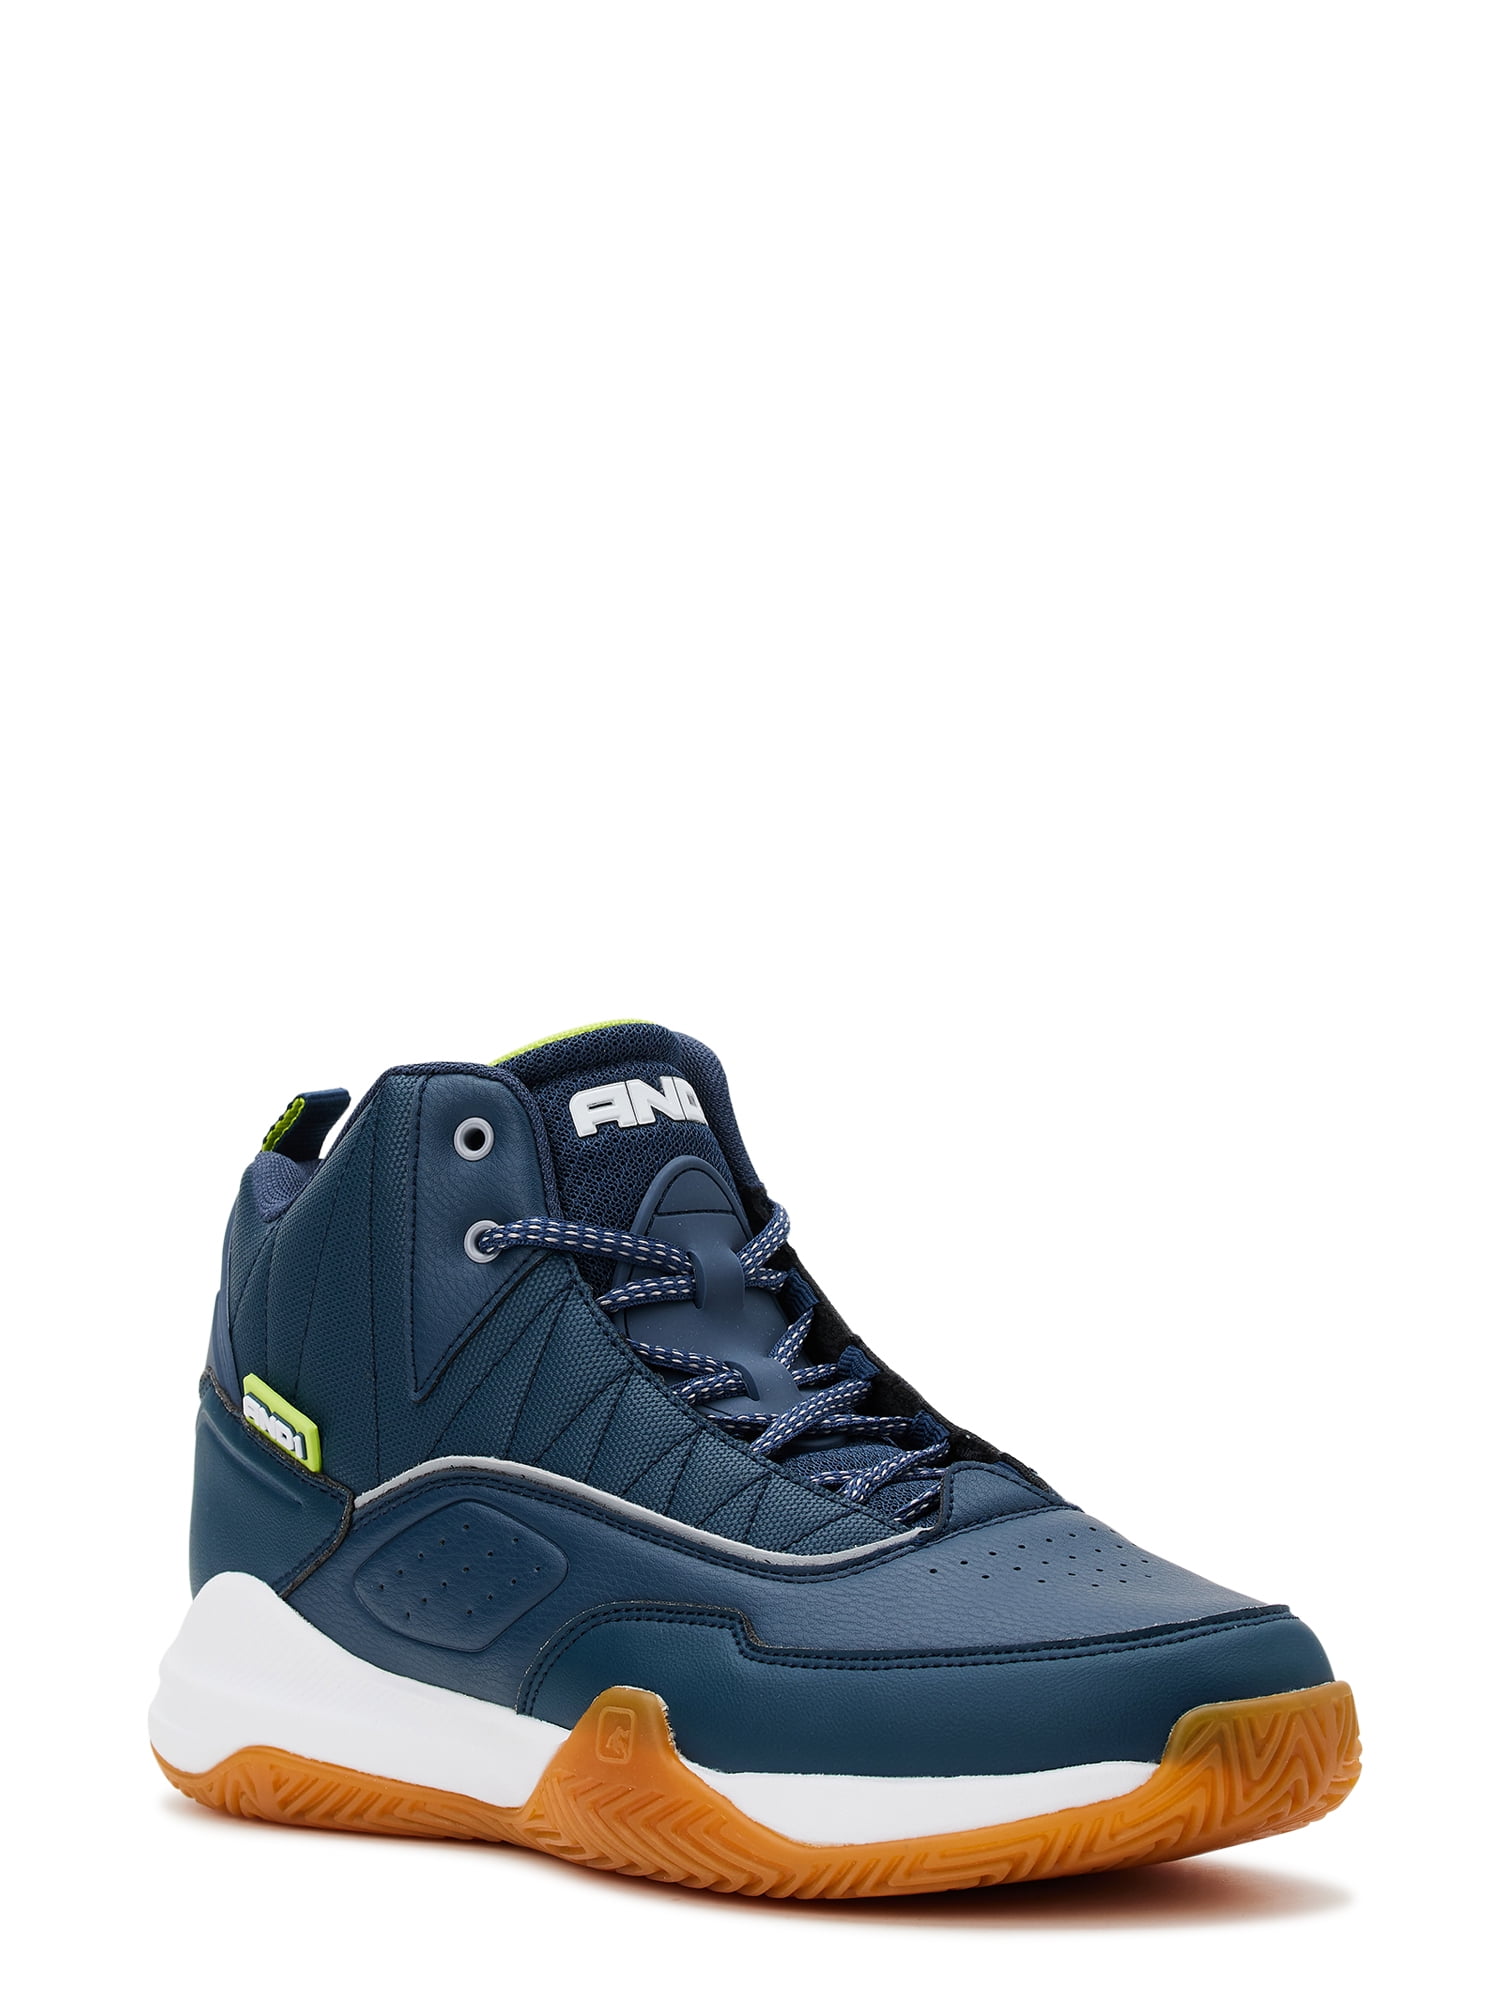 AND1 Men's Streetball Basketball High-Top Sneakers